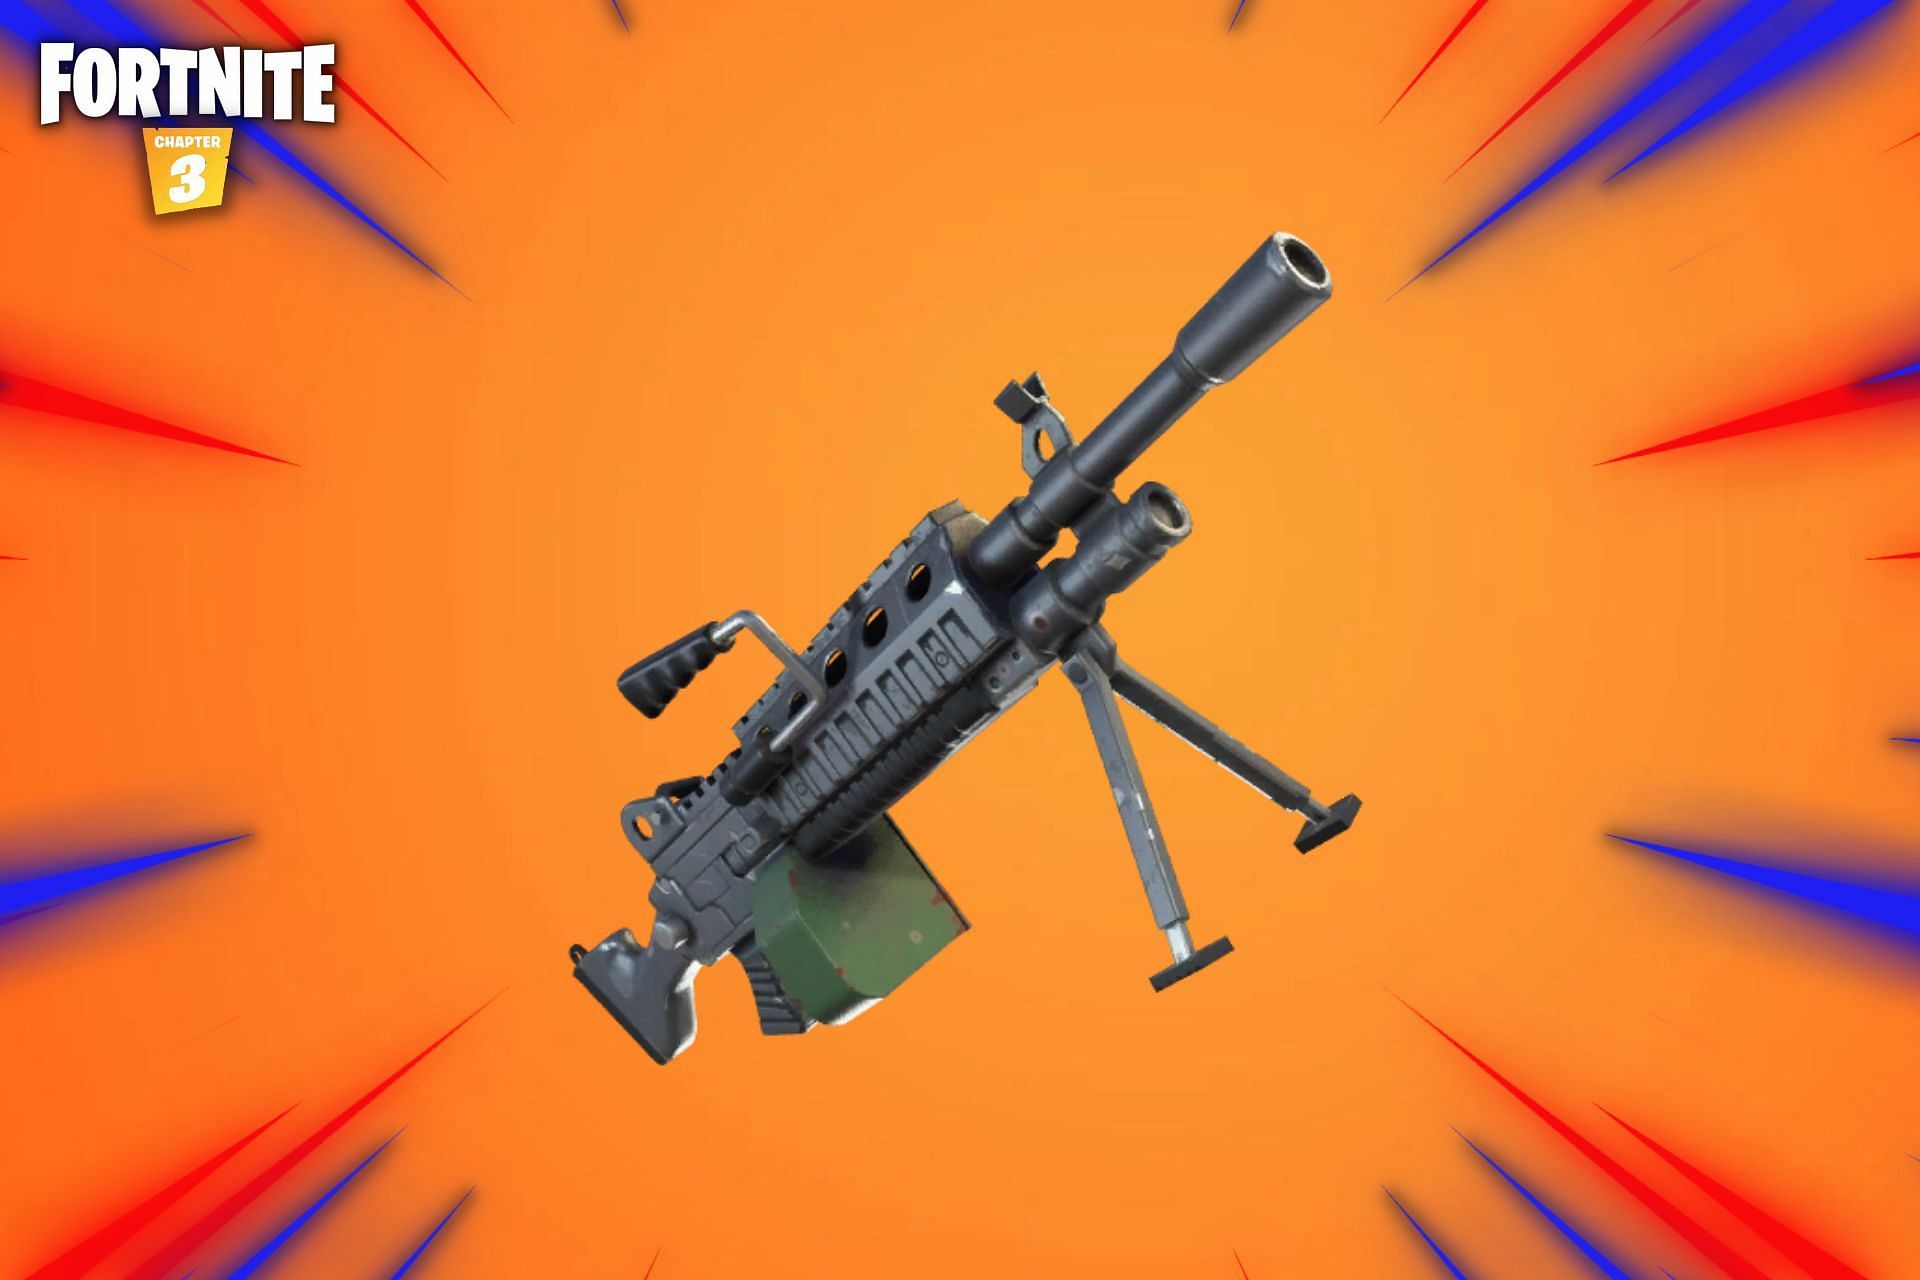 LMGs will be unvaulted and added to Fortnite on April 26, 9 AM Eastern Time (Image via Sportskeeda)